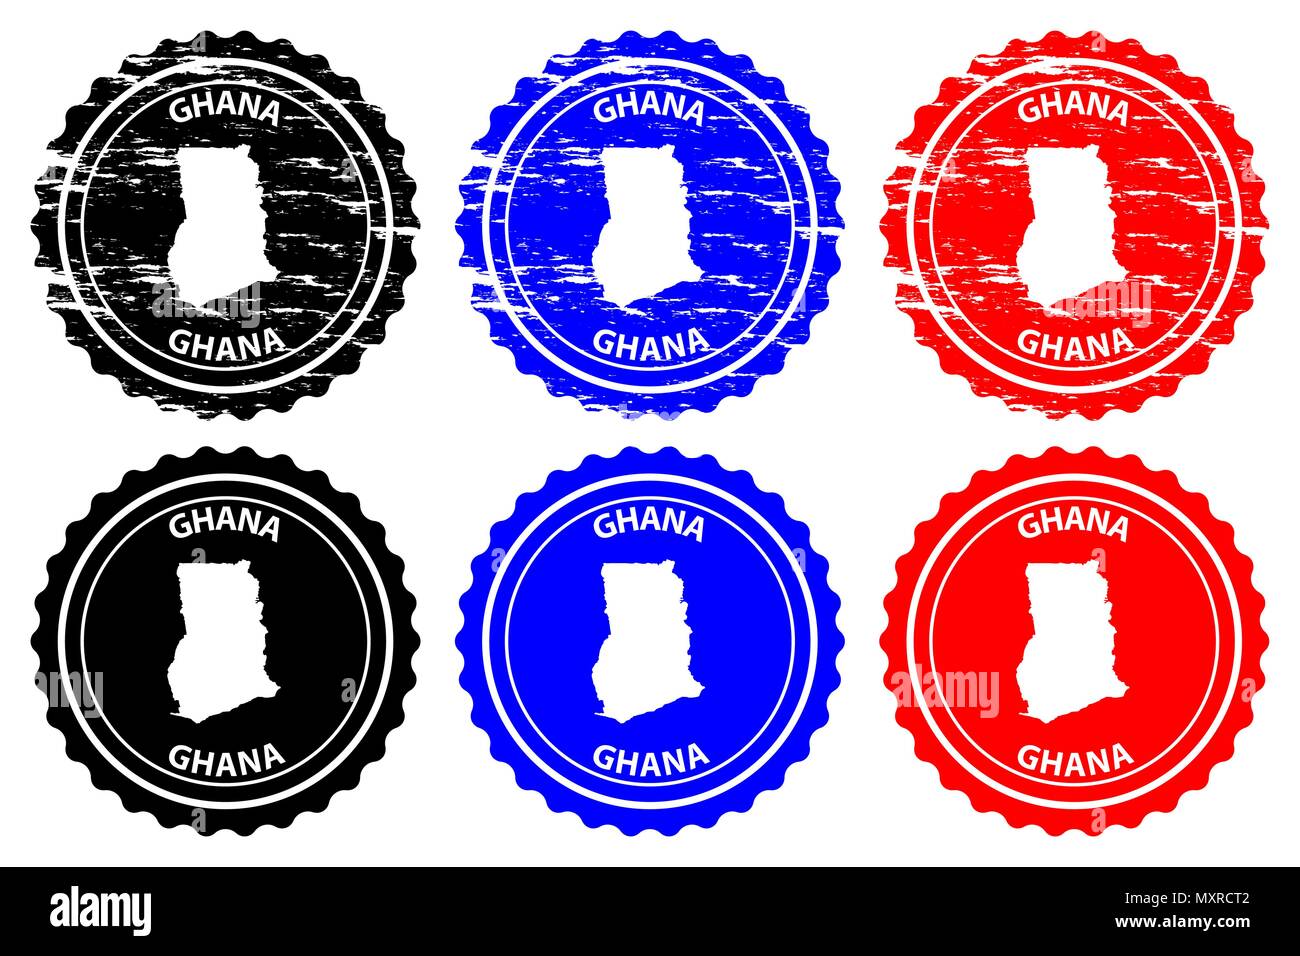 Ghana - rubber stamp - vector, Republic of Ghana map pattern - sticker - black, blue and red Stock Vector